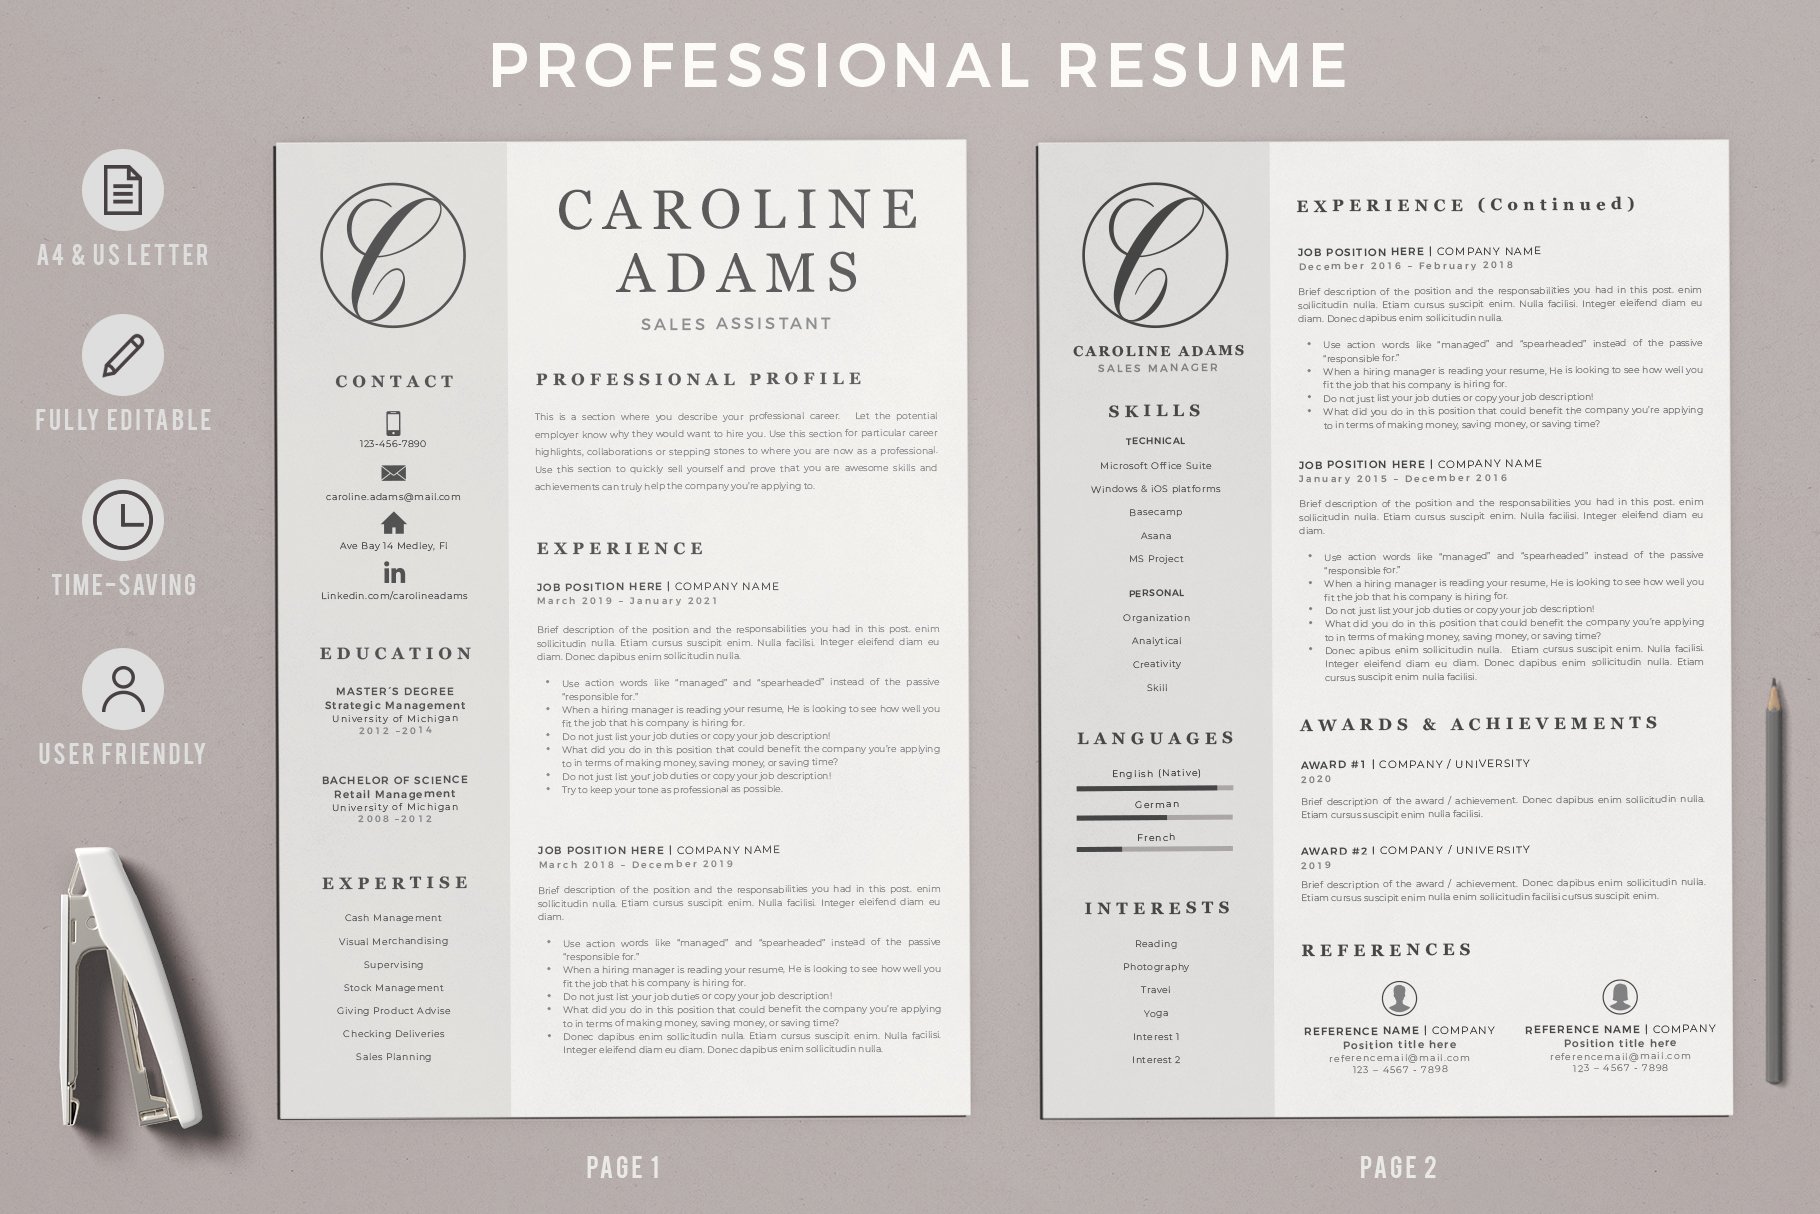 Sales Assistant Creative Resume preview image.